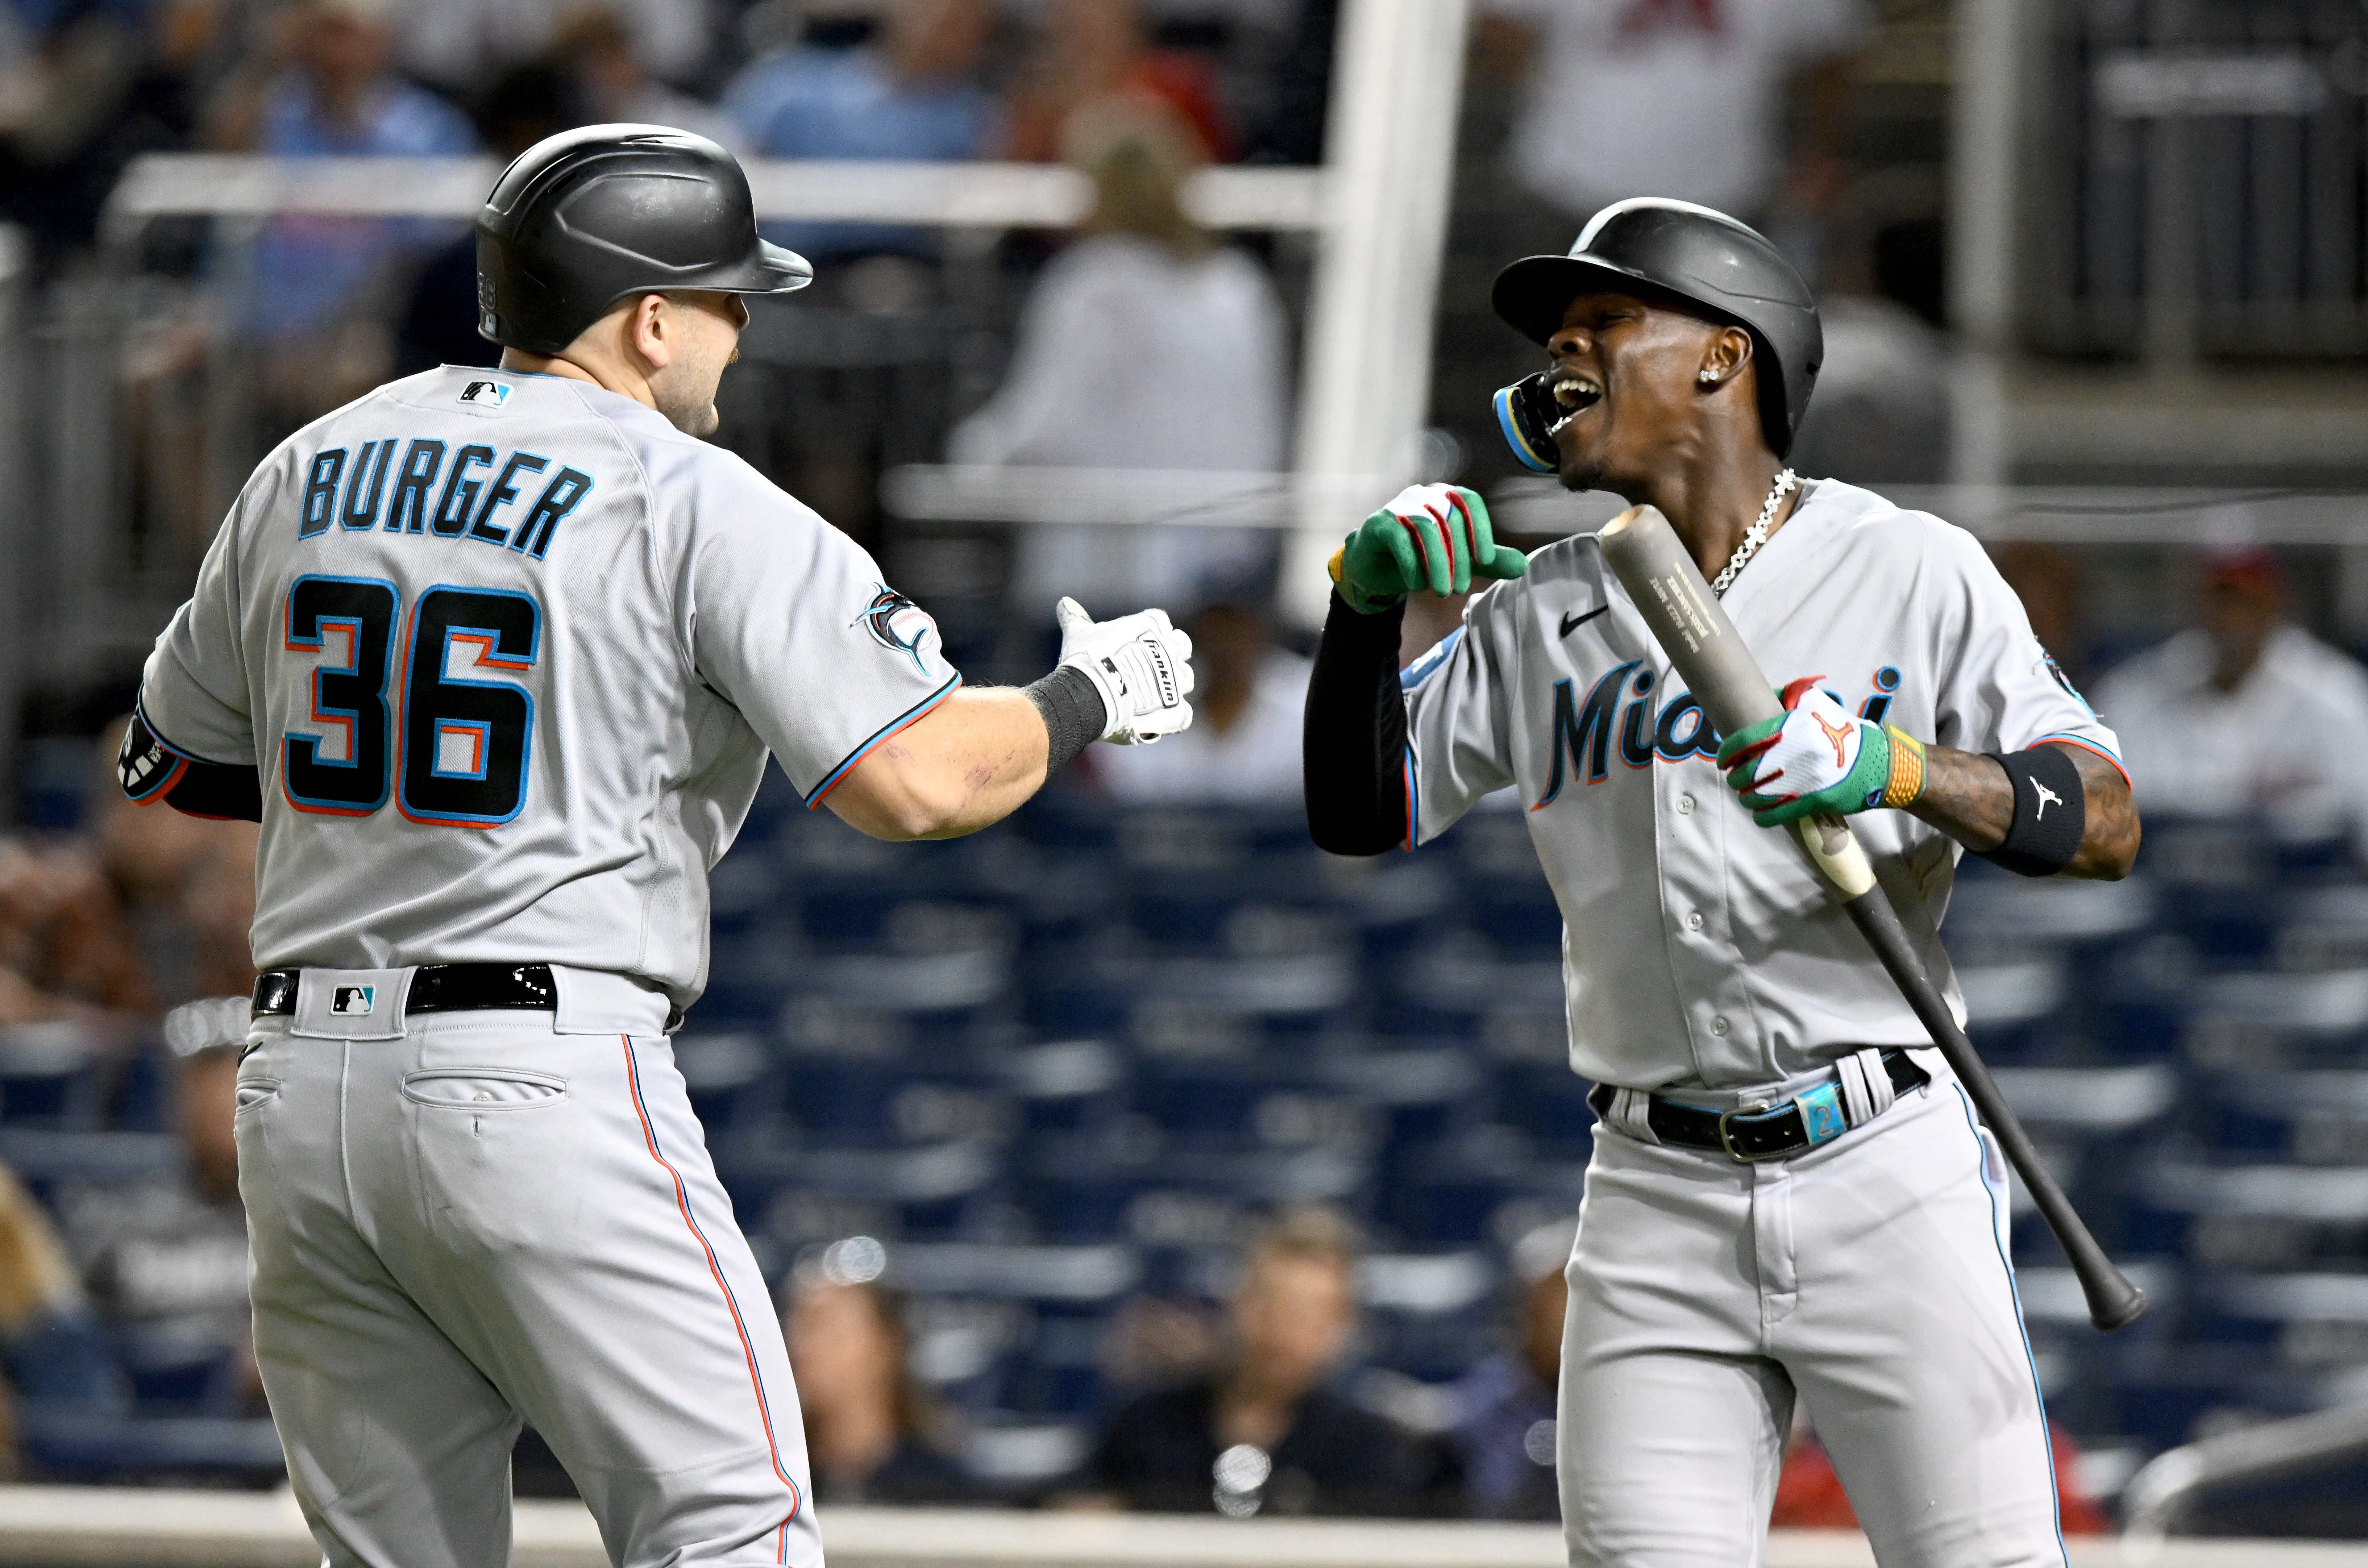 Hampson's 2-run HR caps 11th inning rally and sends Marlins past Nationals  8-5 - ABC News